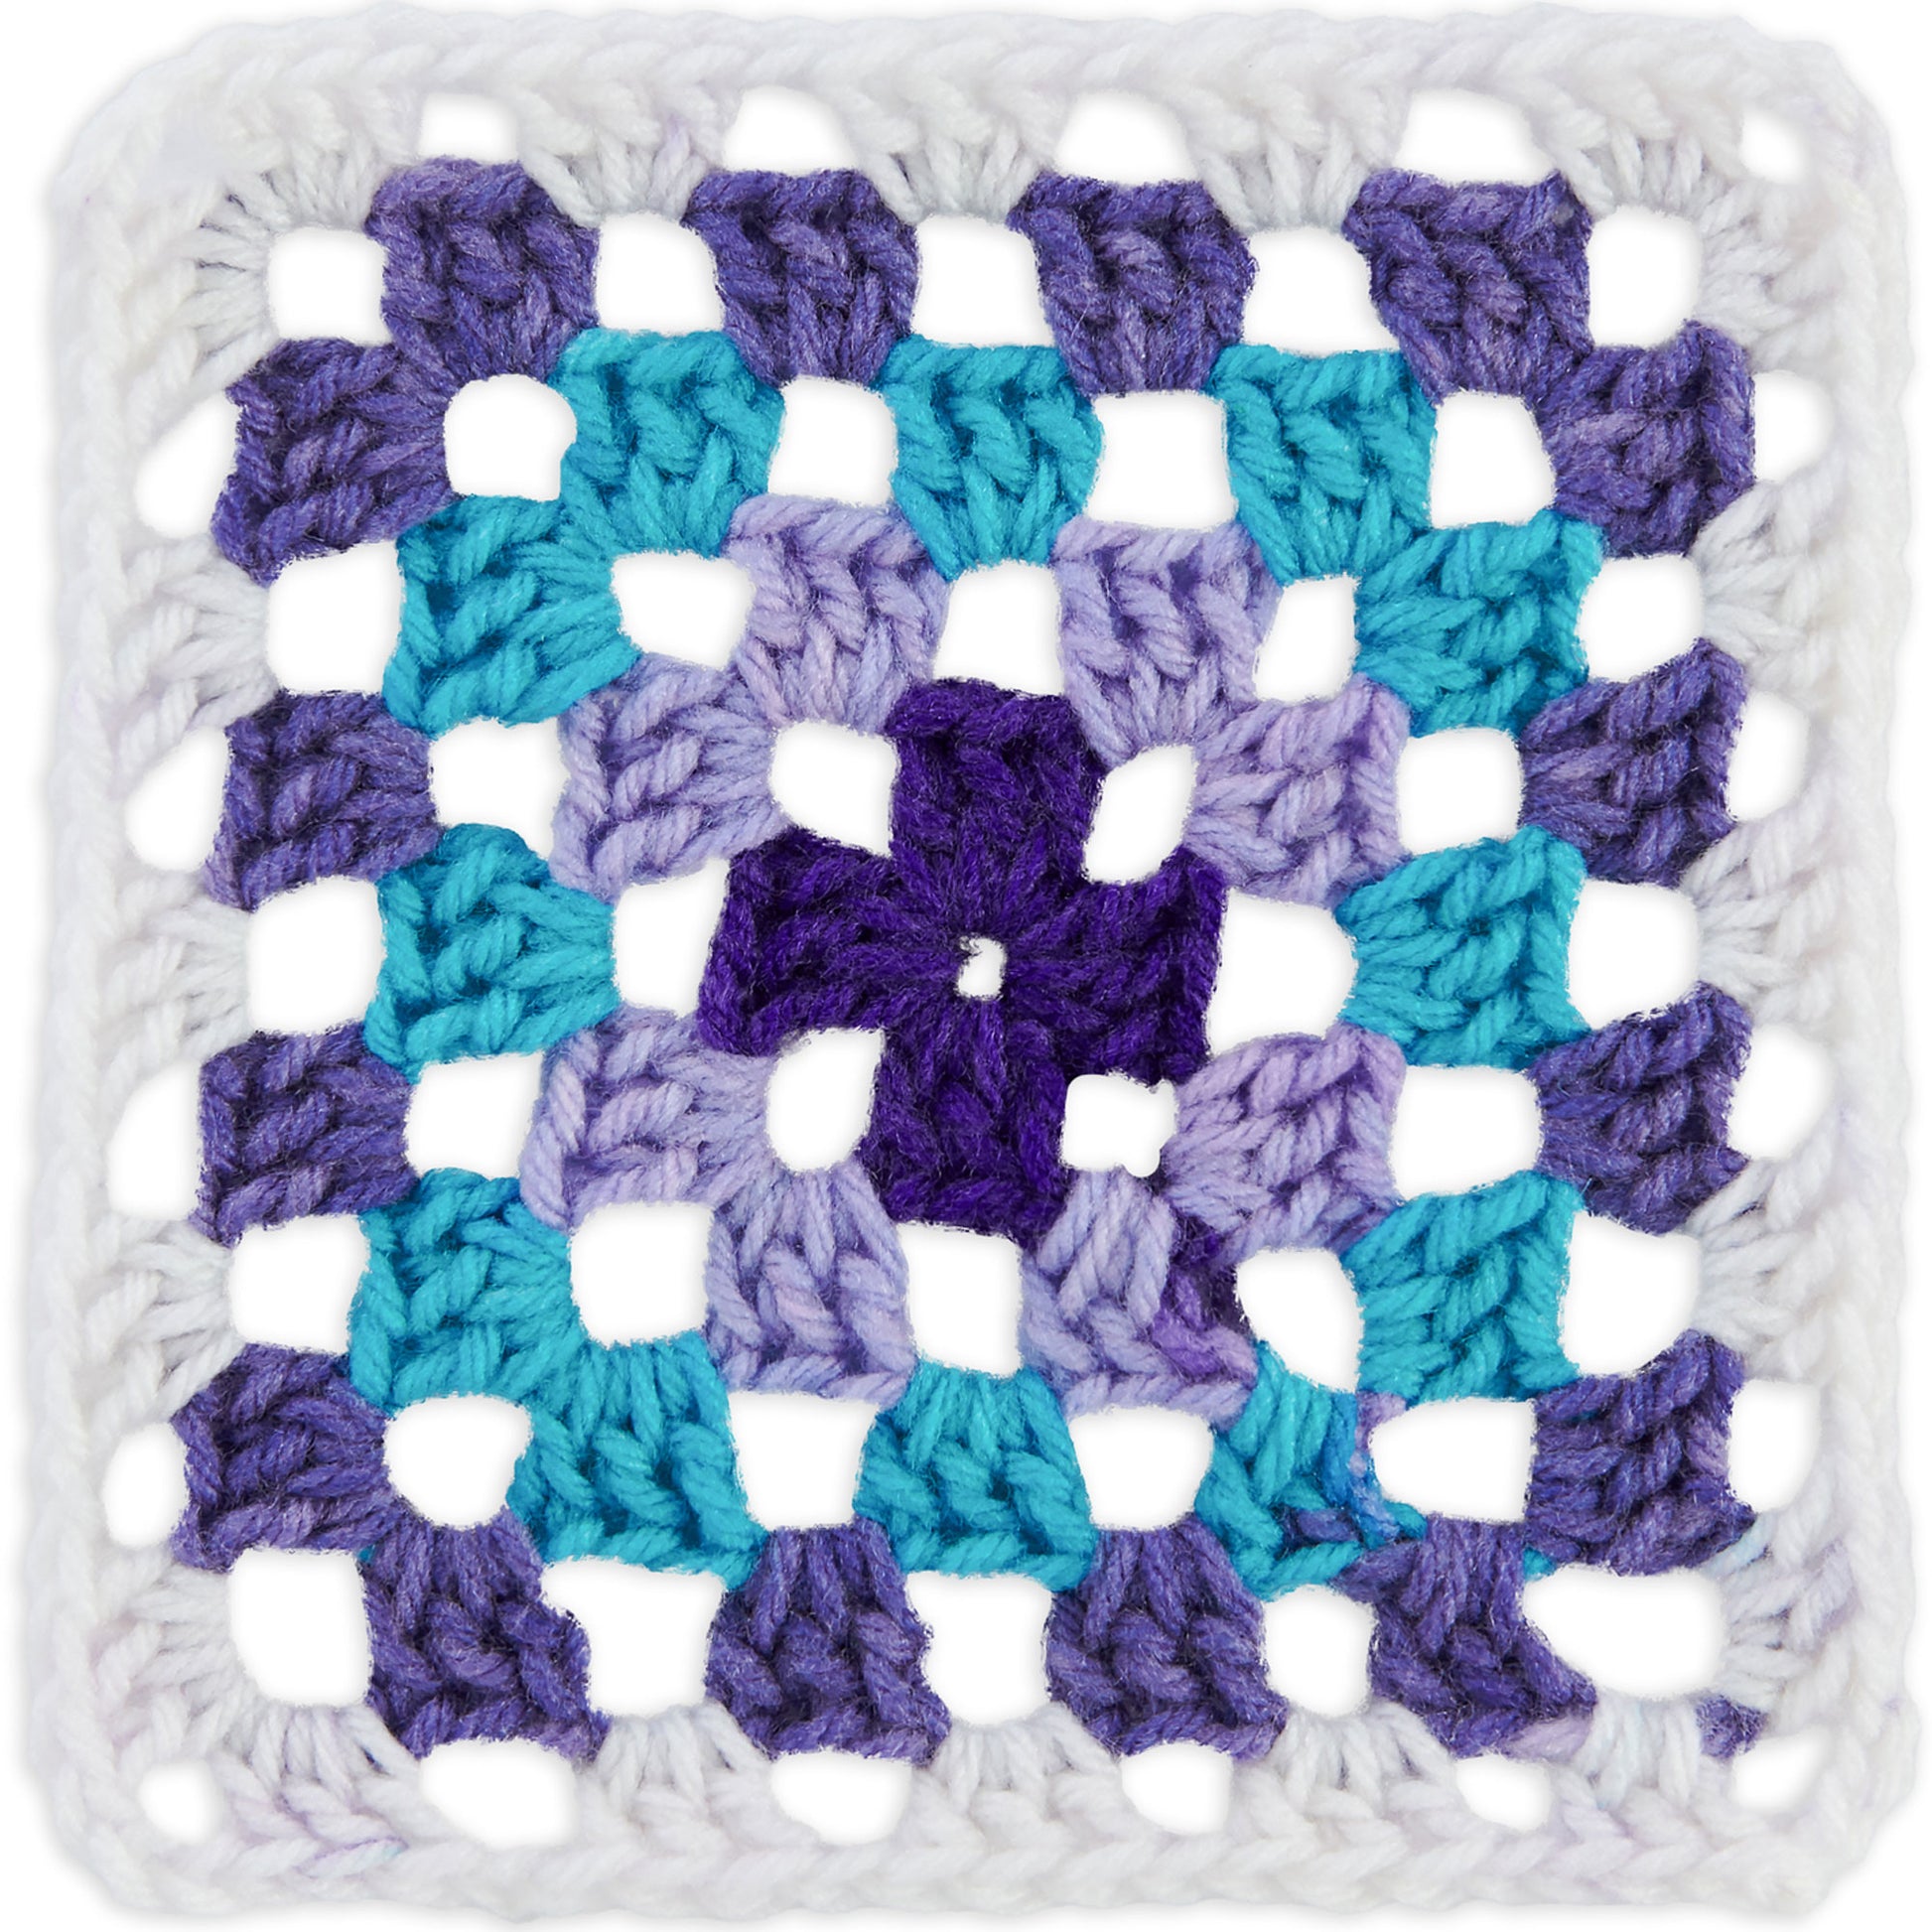 Red Heart All In One Granny Square Yarn (250g/8.8oz) Soft White - Amethyst